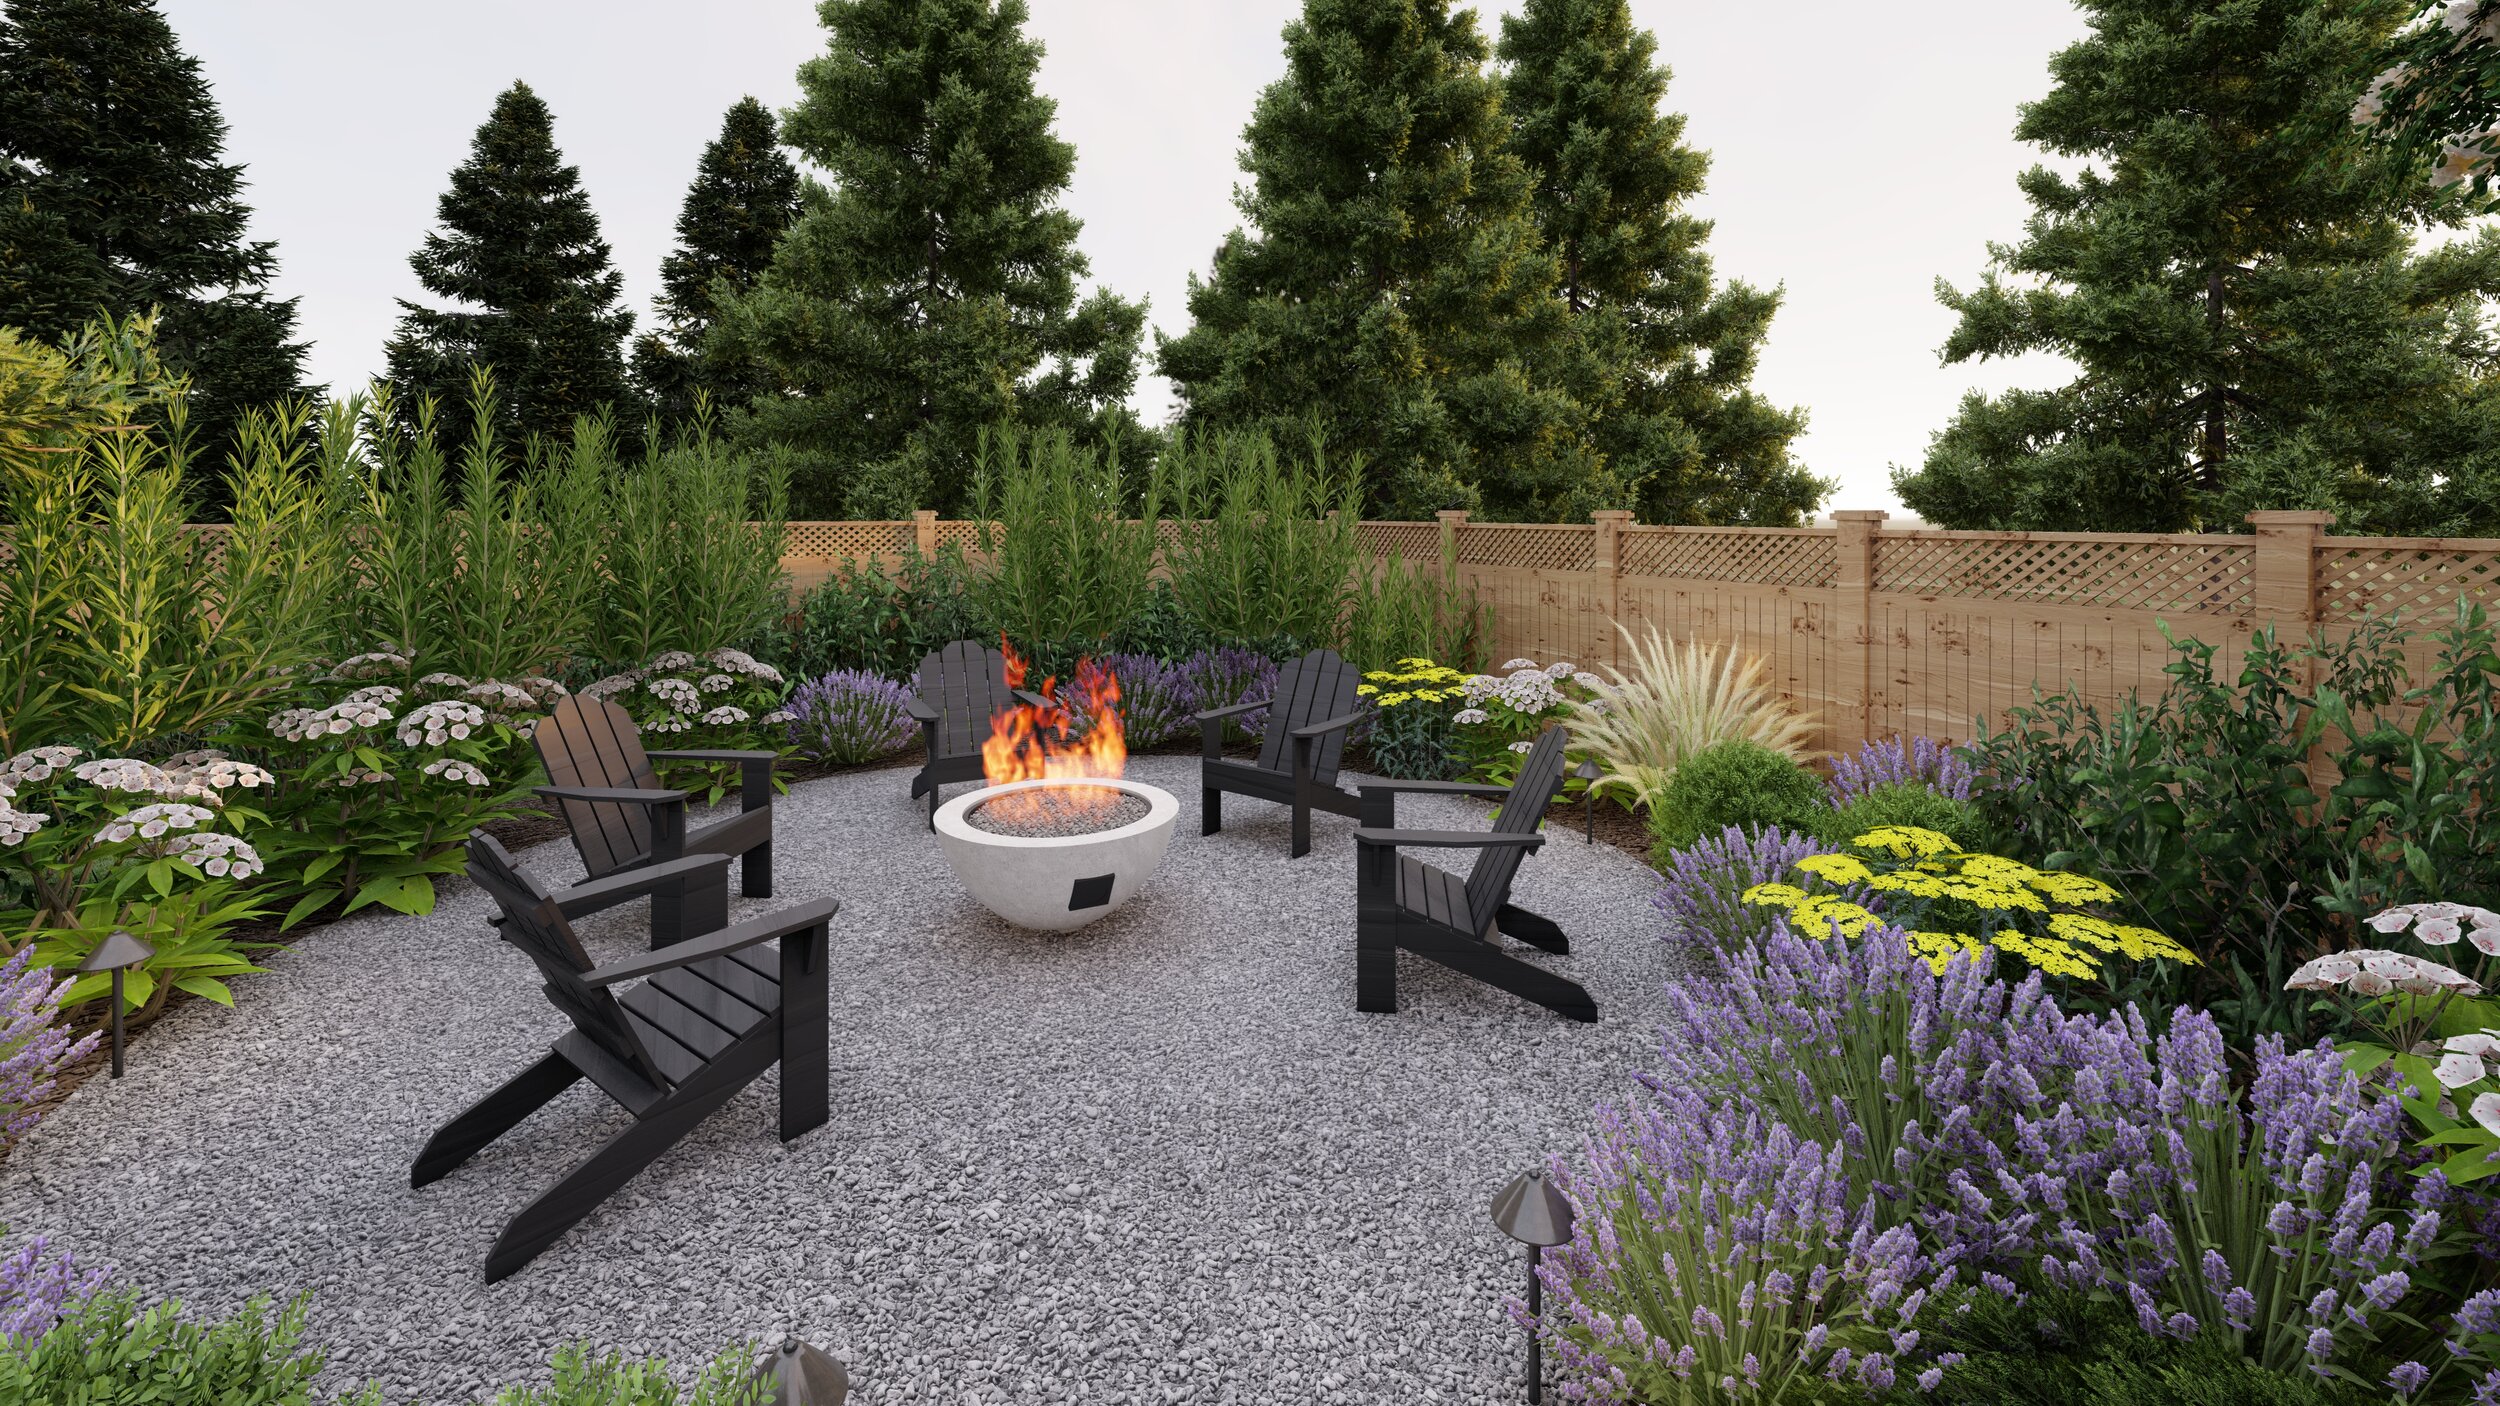 Backyard view of fire pit area with black adirandack chairs around fire pit